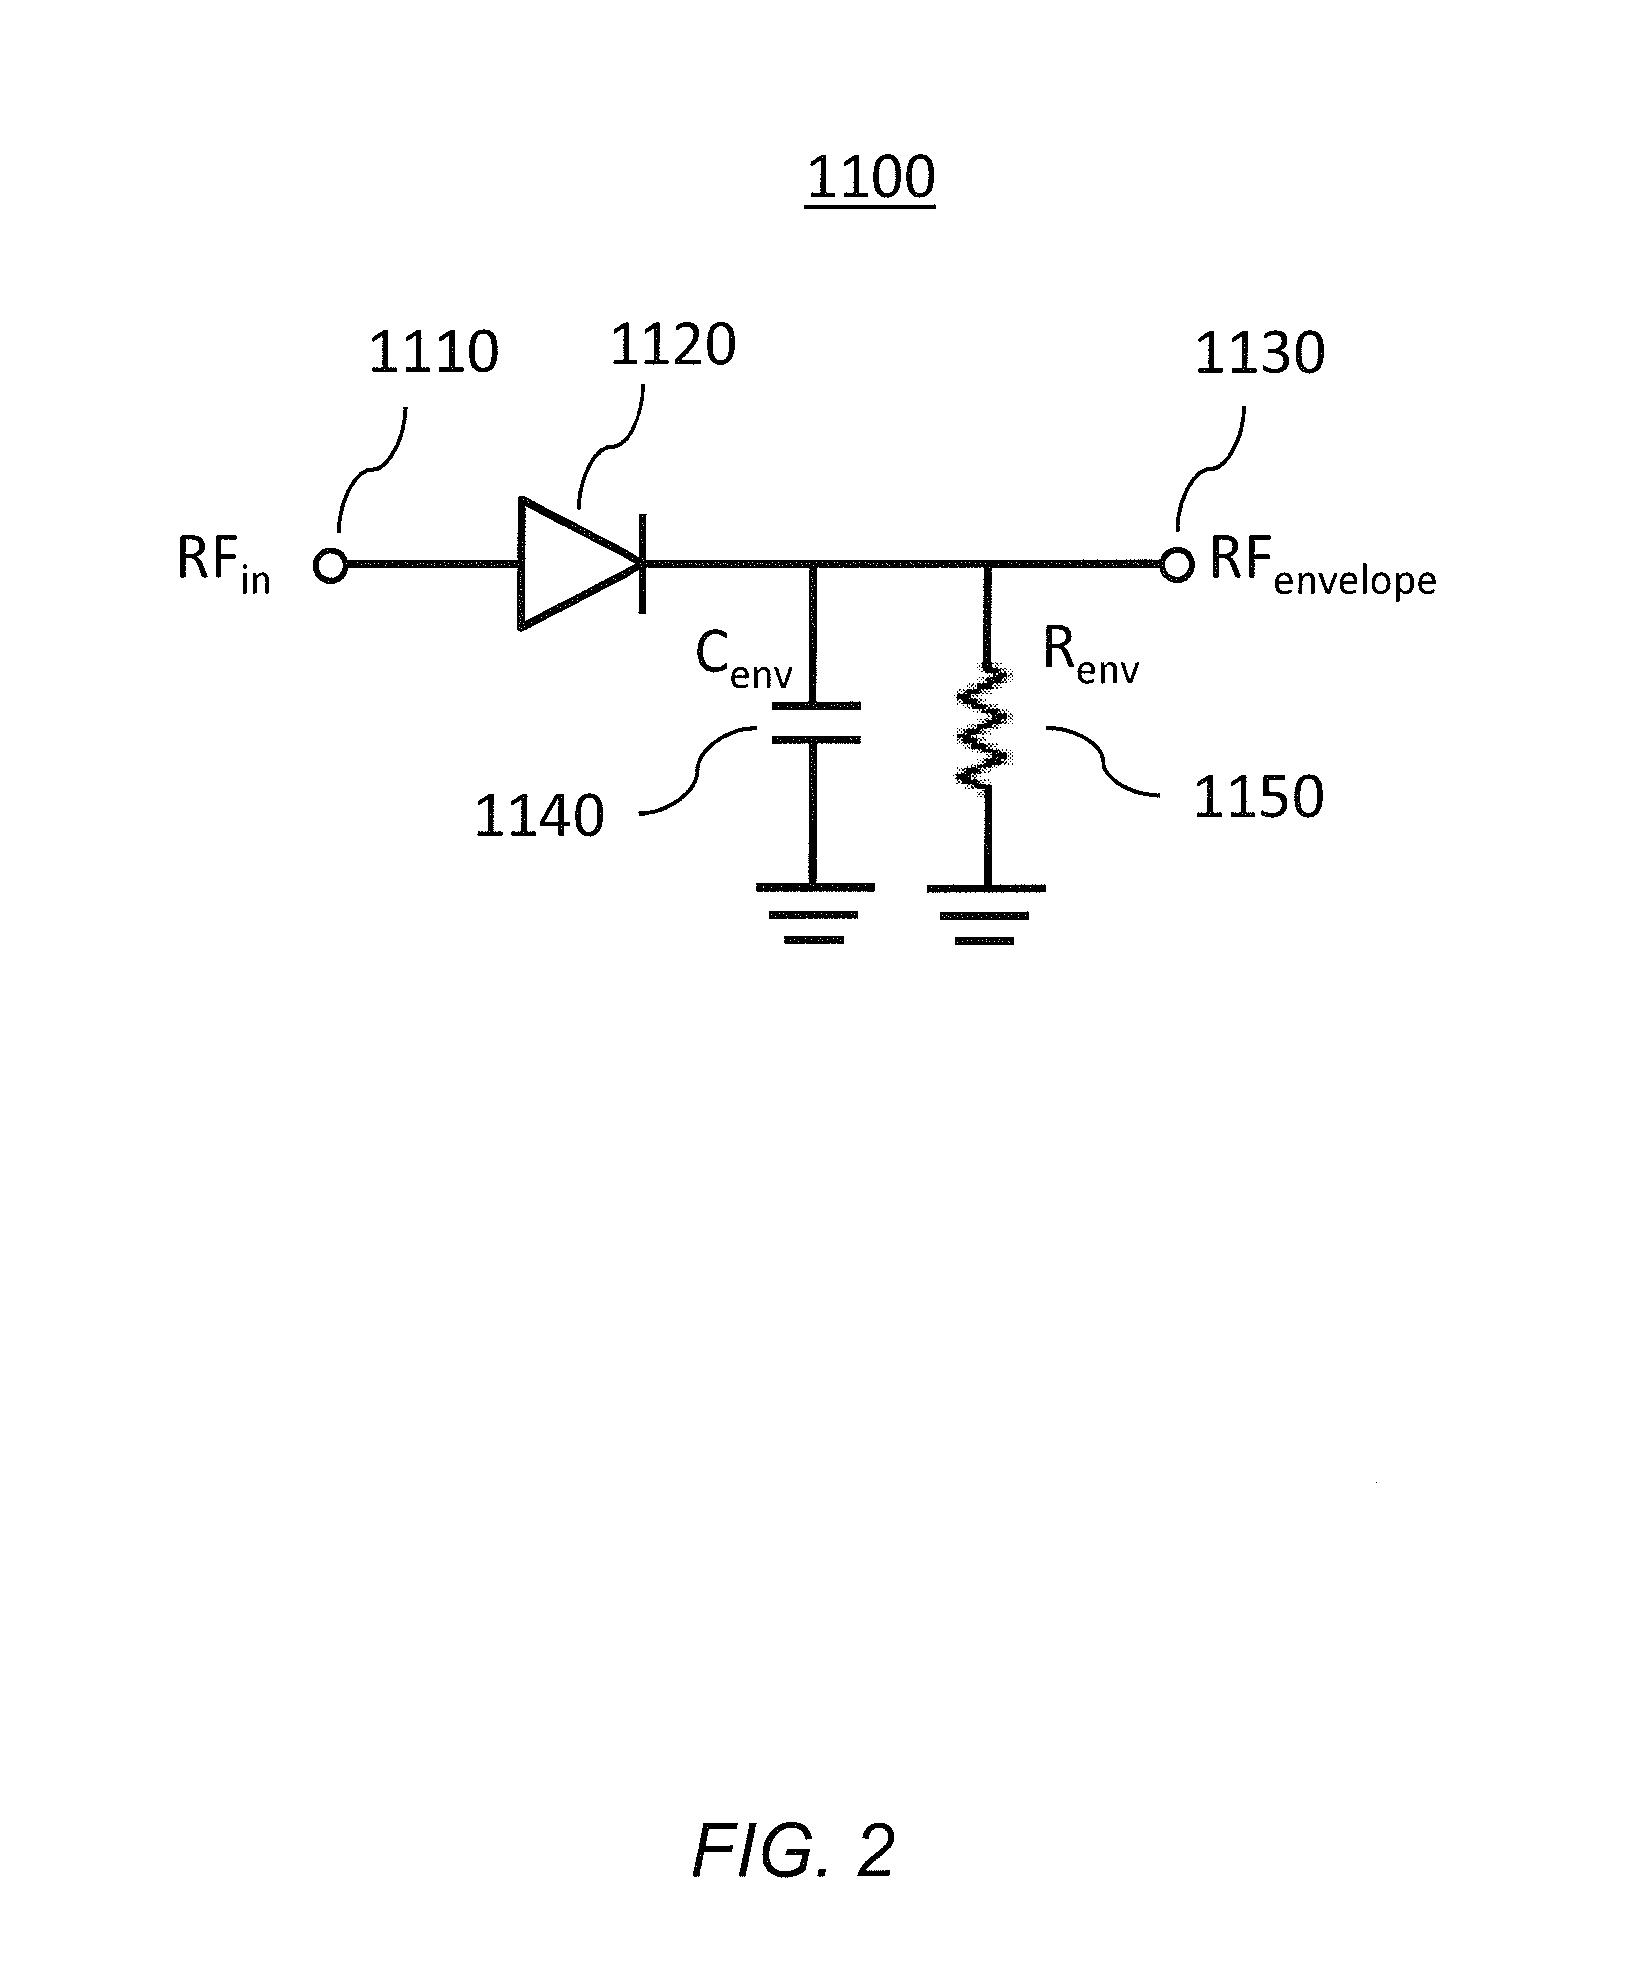 Control Systems and Methods for Power Amplifiers Operating in Envelope Tracking Mode